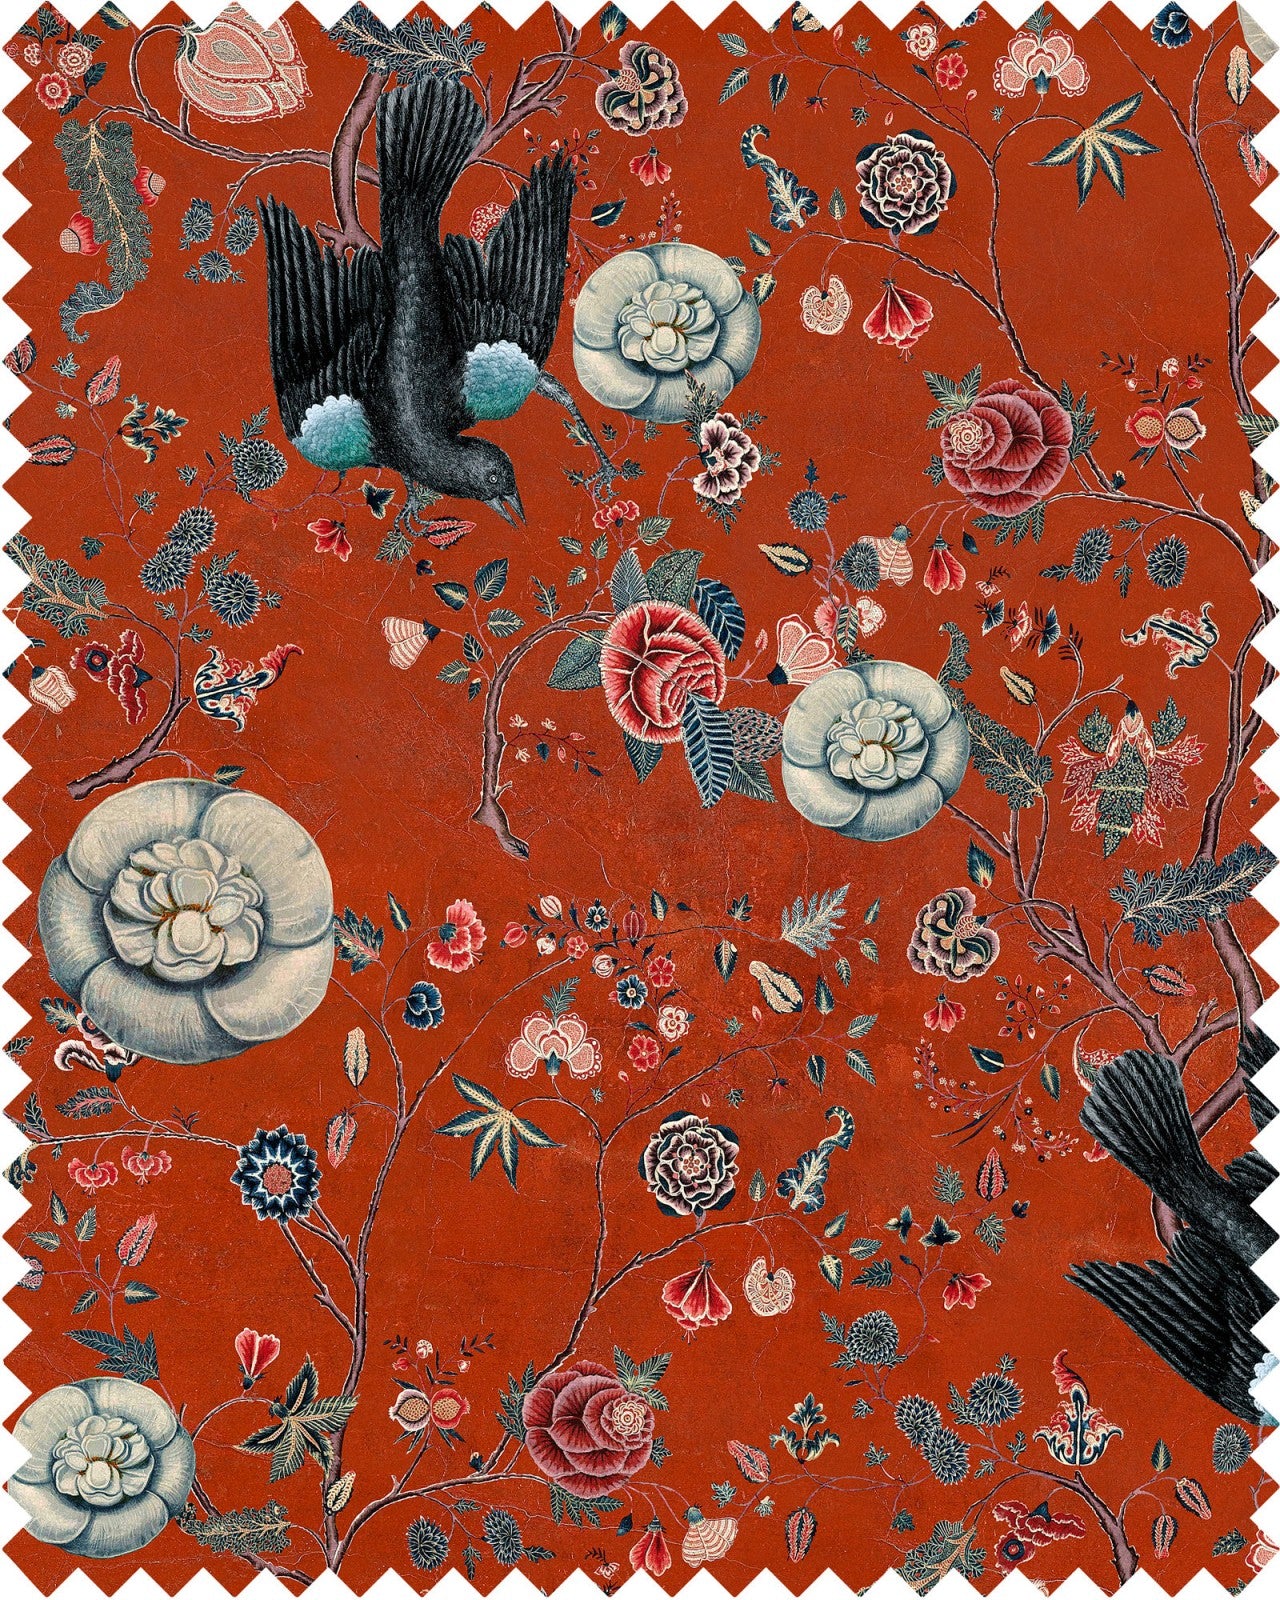 Black Bird fabric in red color - pattern number FB00009 - by Mind The Gap in the Nomad Story collection